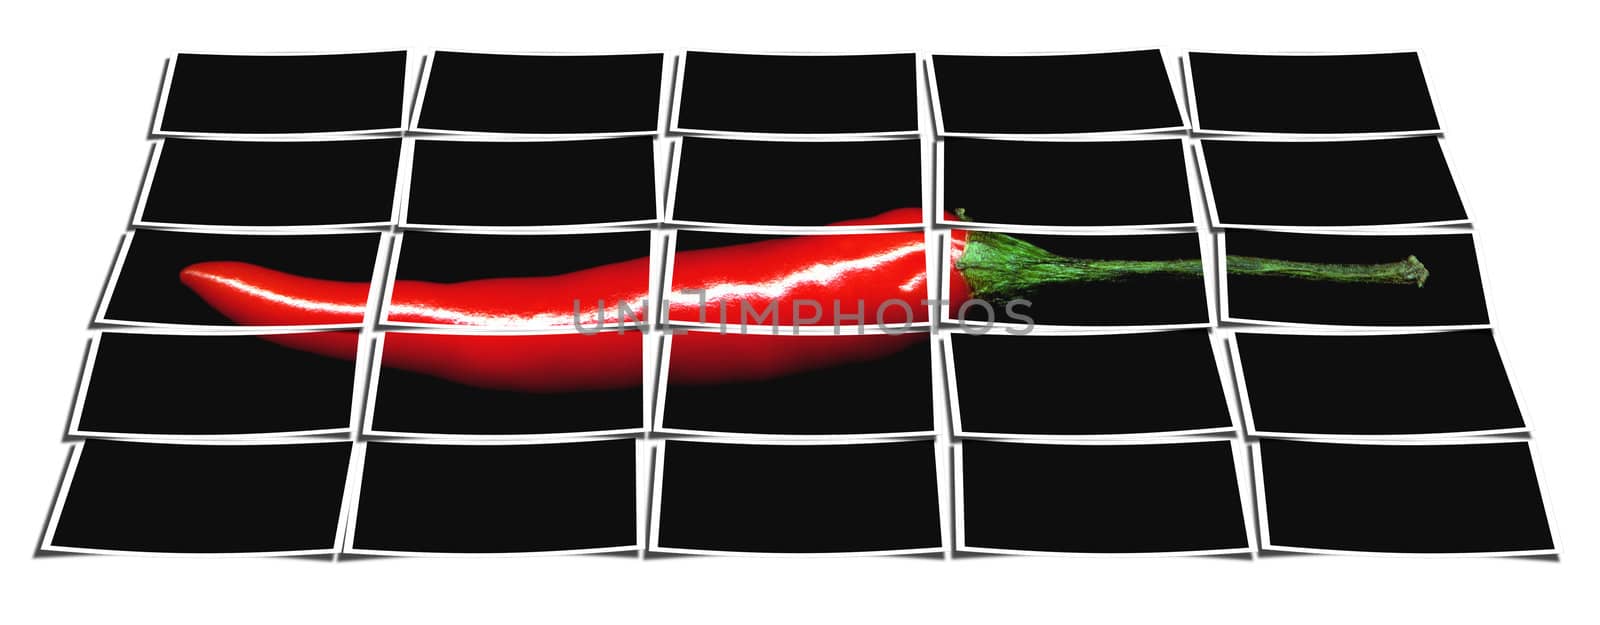 red chili pepper on black background cut out composition over white